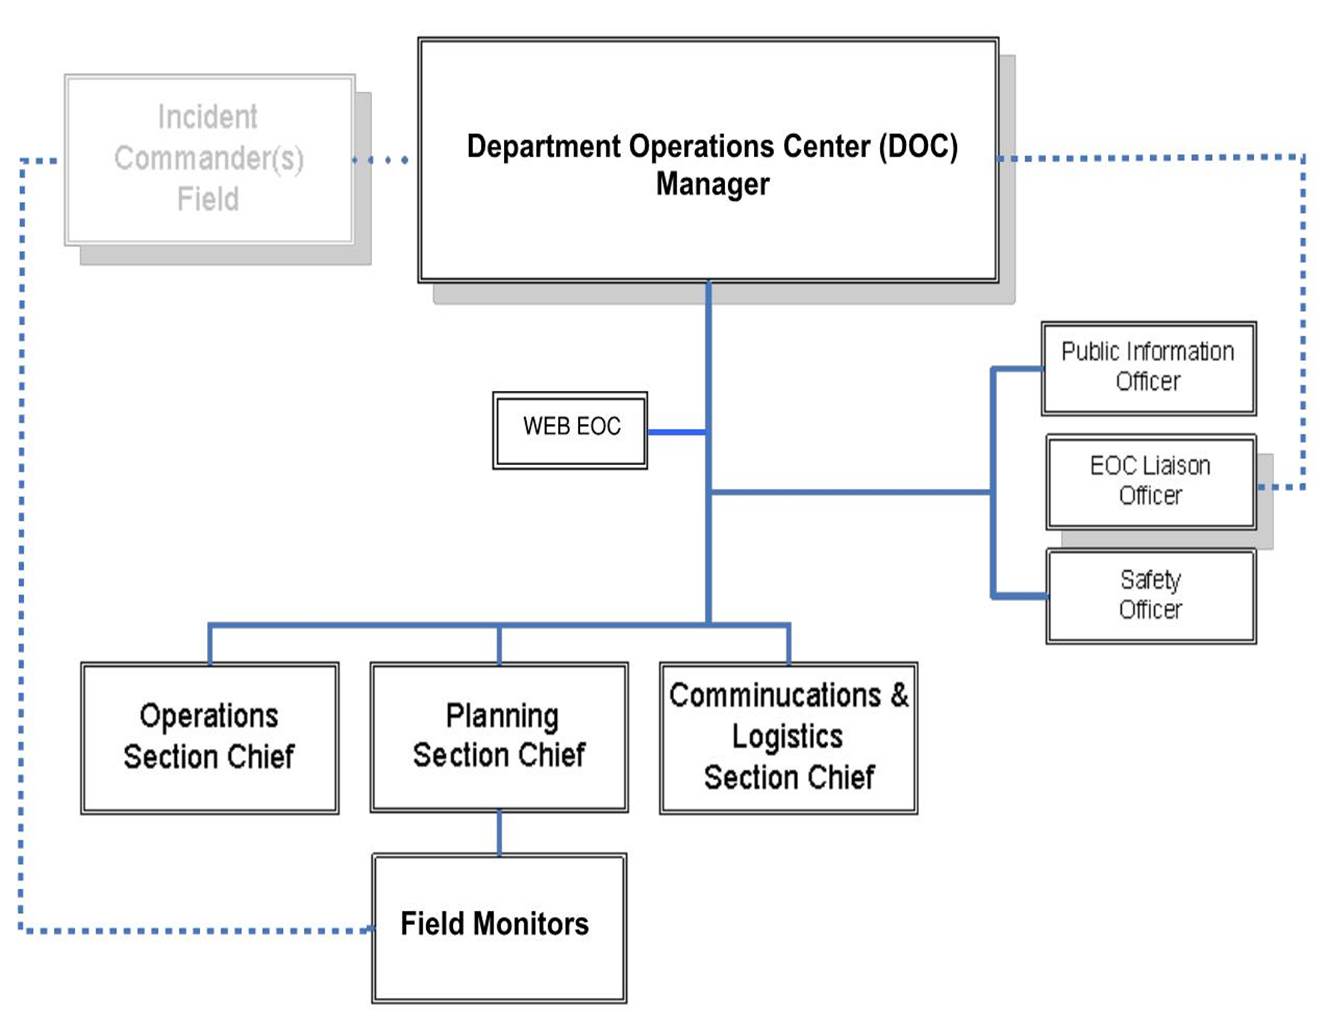 The stormwater Department Operations Center organizational structure